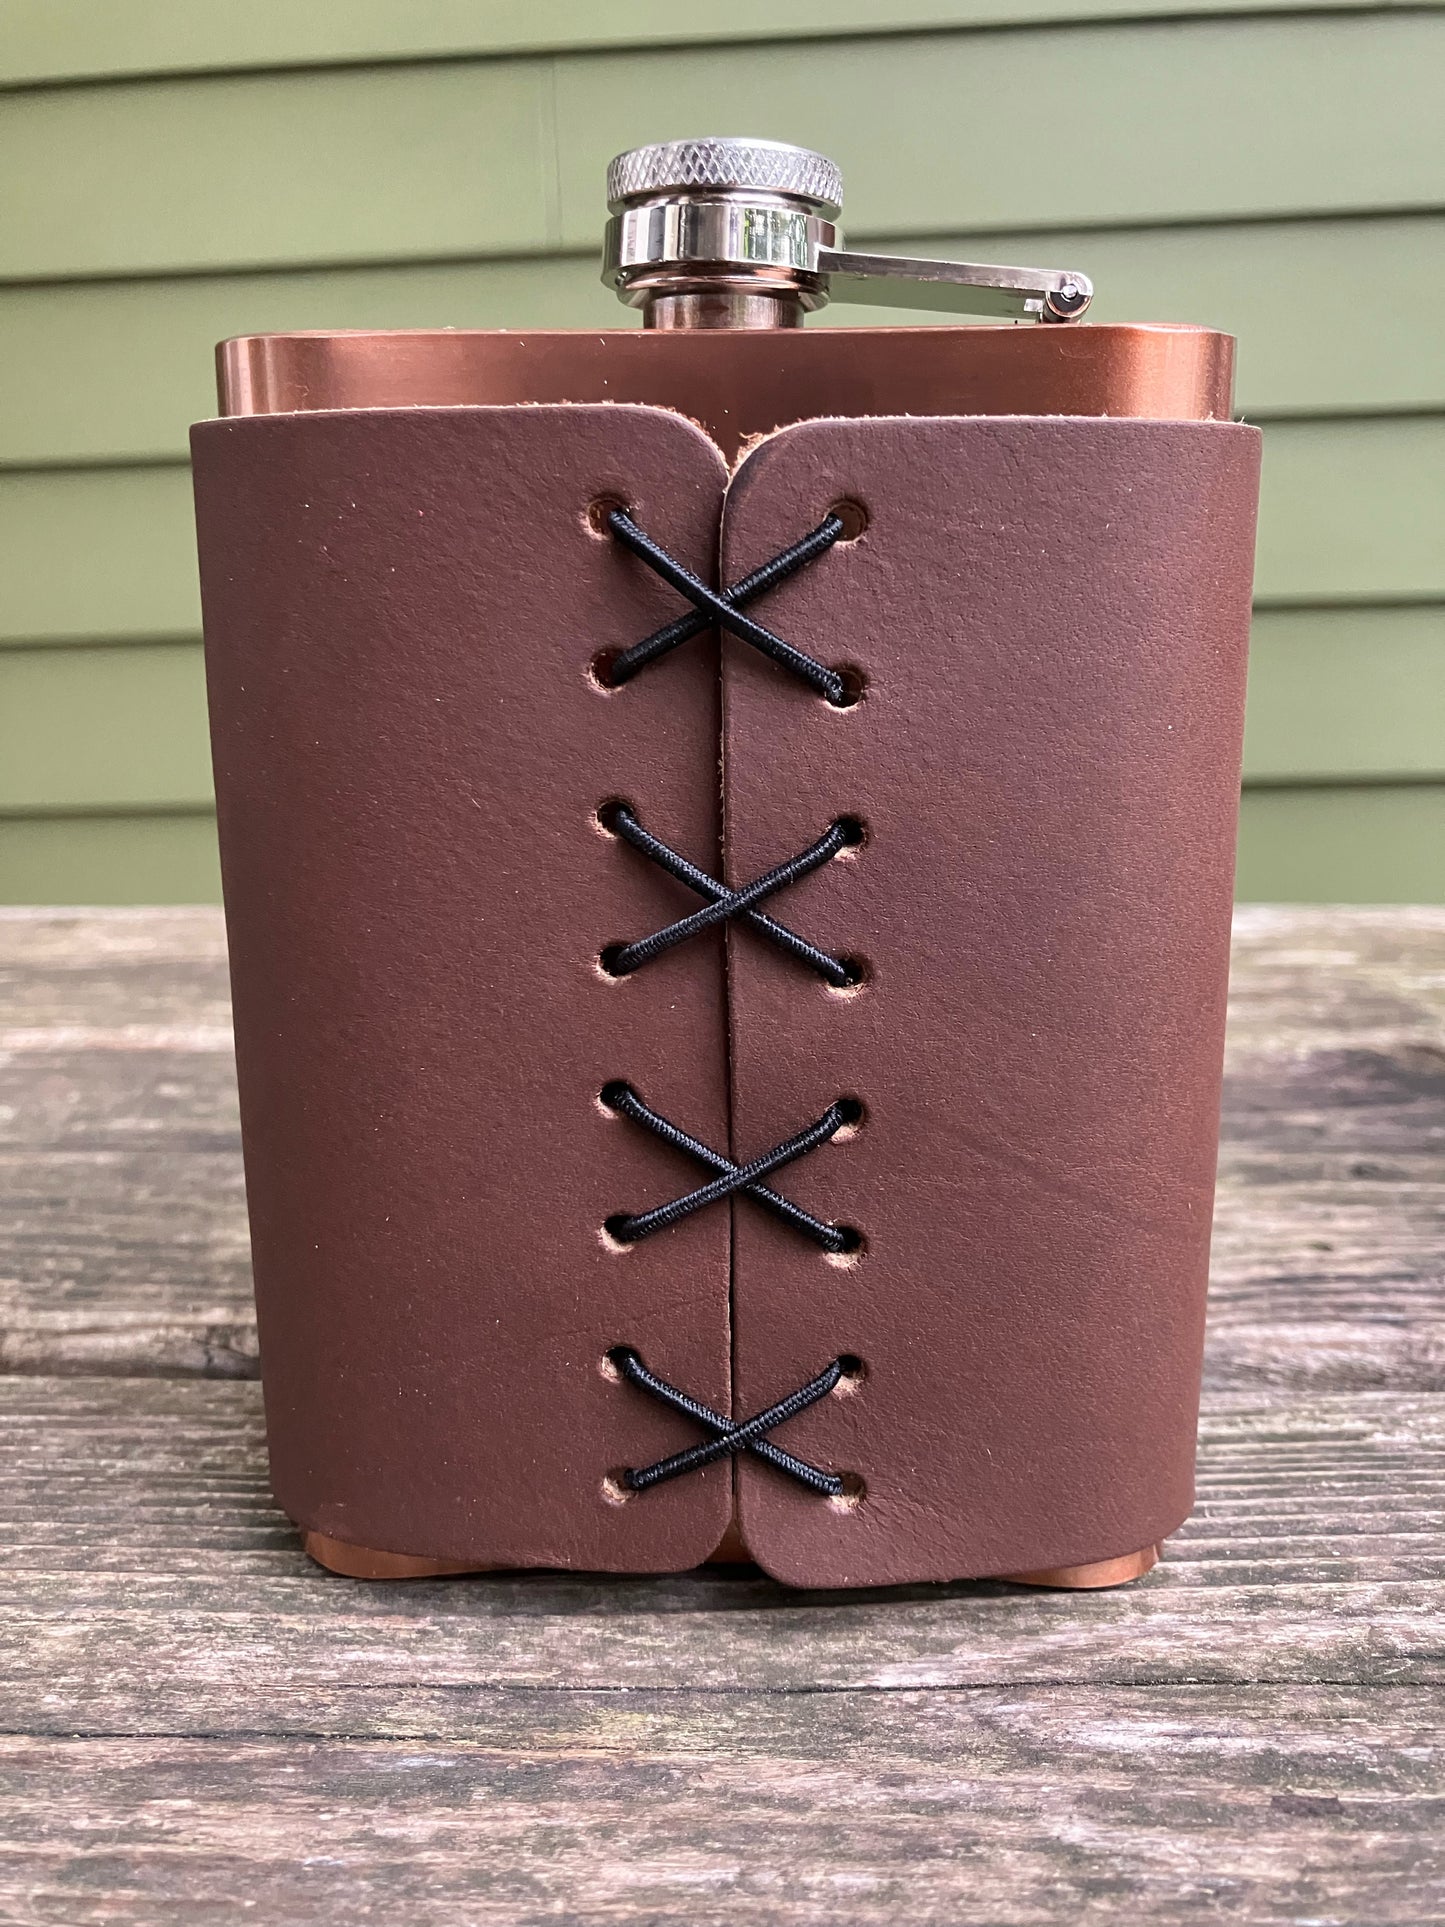 Leather Flask - Texas (spelled)